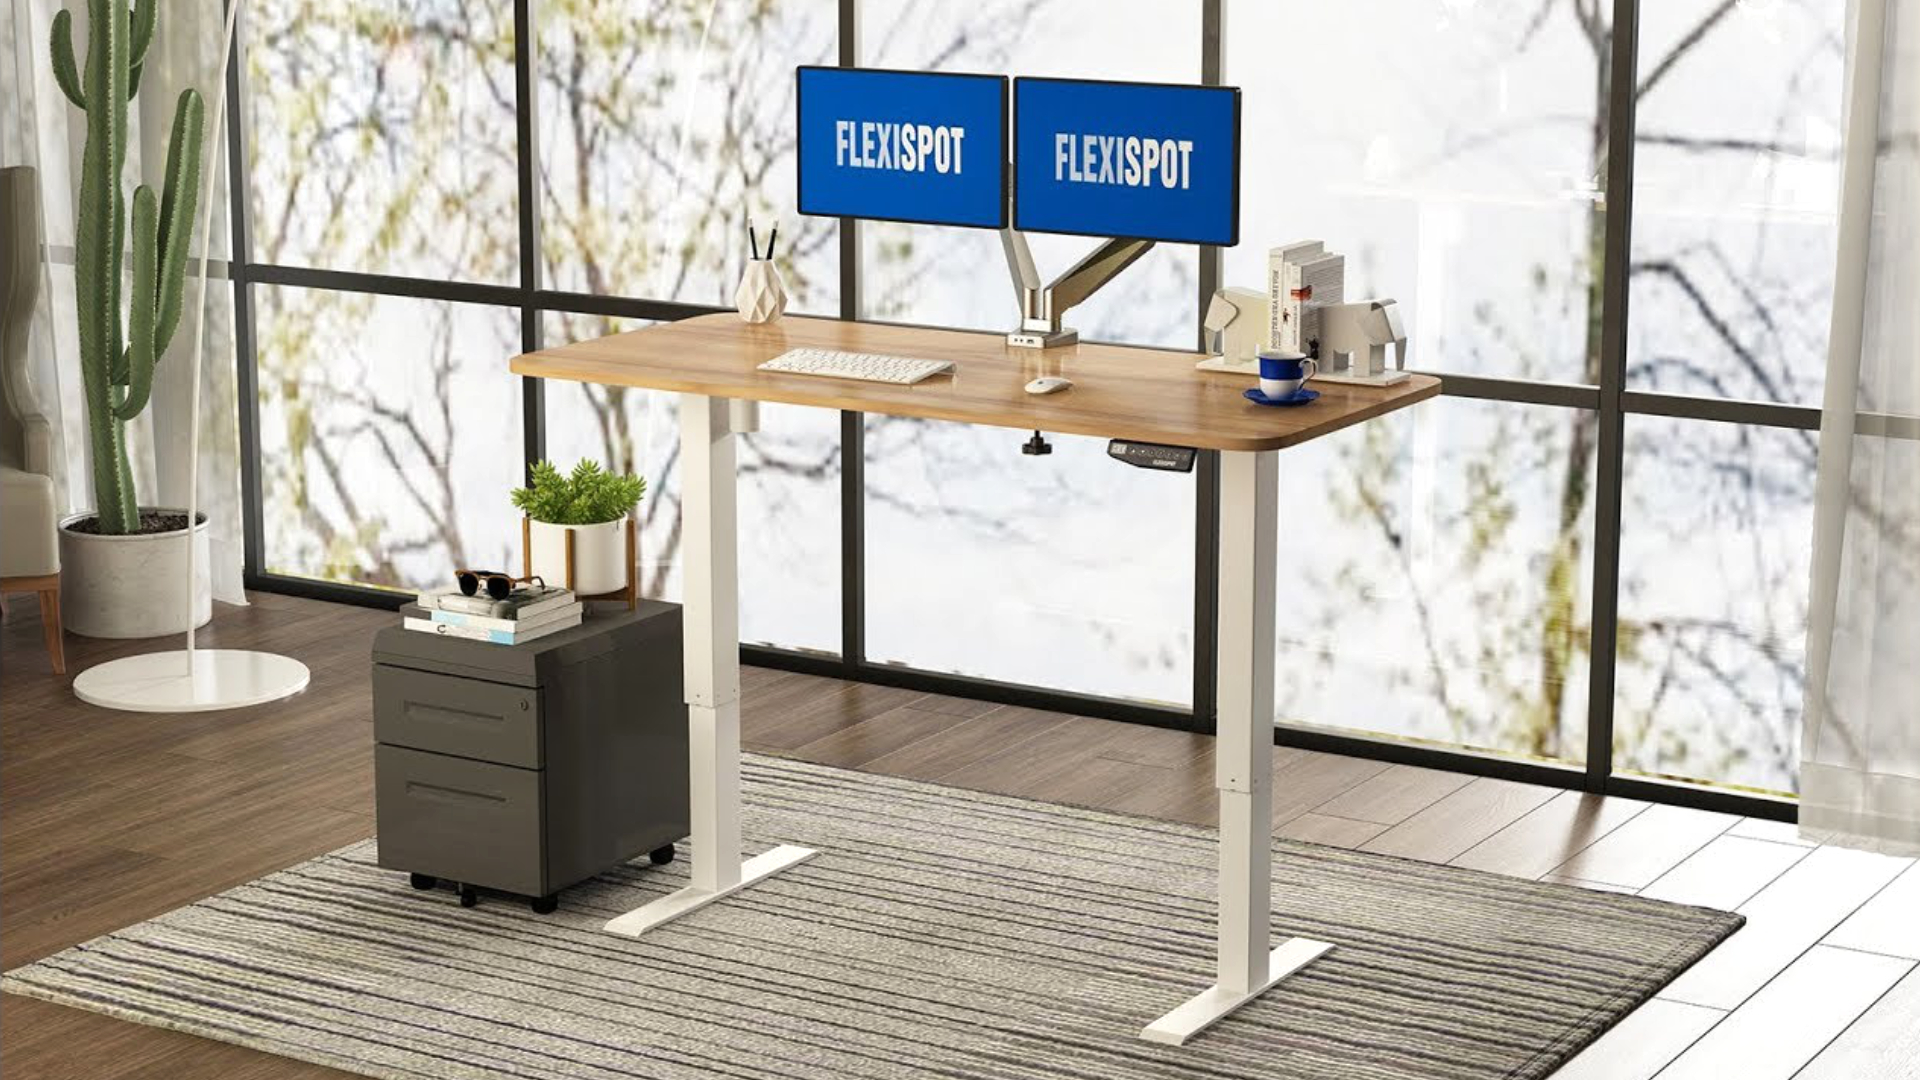 Flexispot’s adjustable desks are currently 30% cheaper ahead of Amazon Prime Day